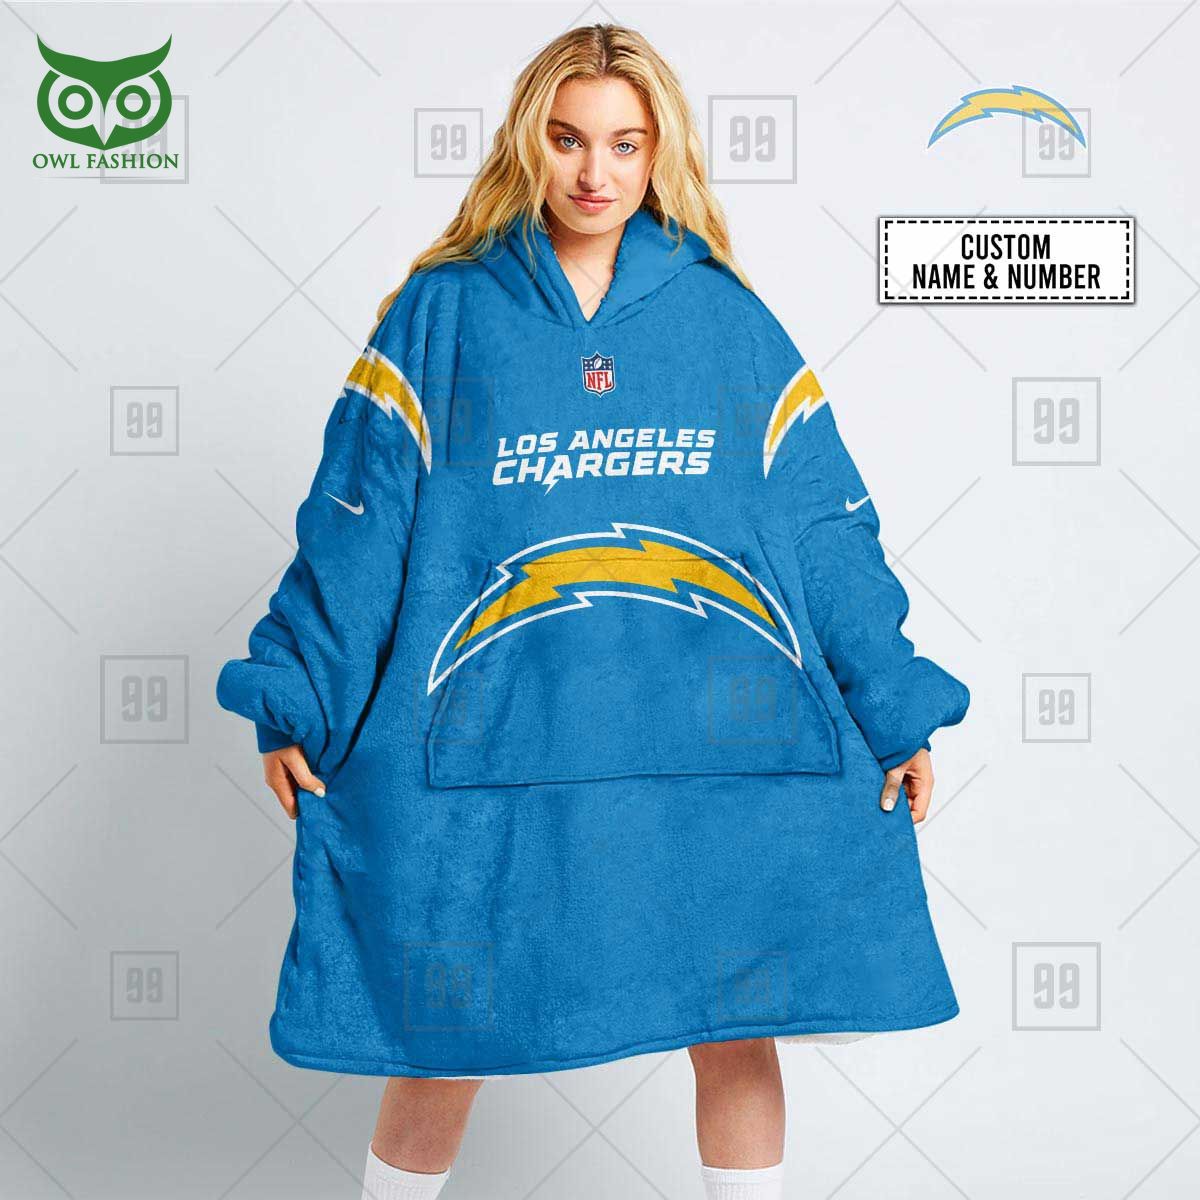 Los Angeles Chargers American League NFL Customized Snuggie Hoodie